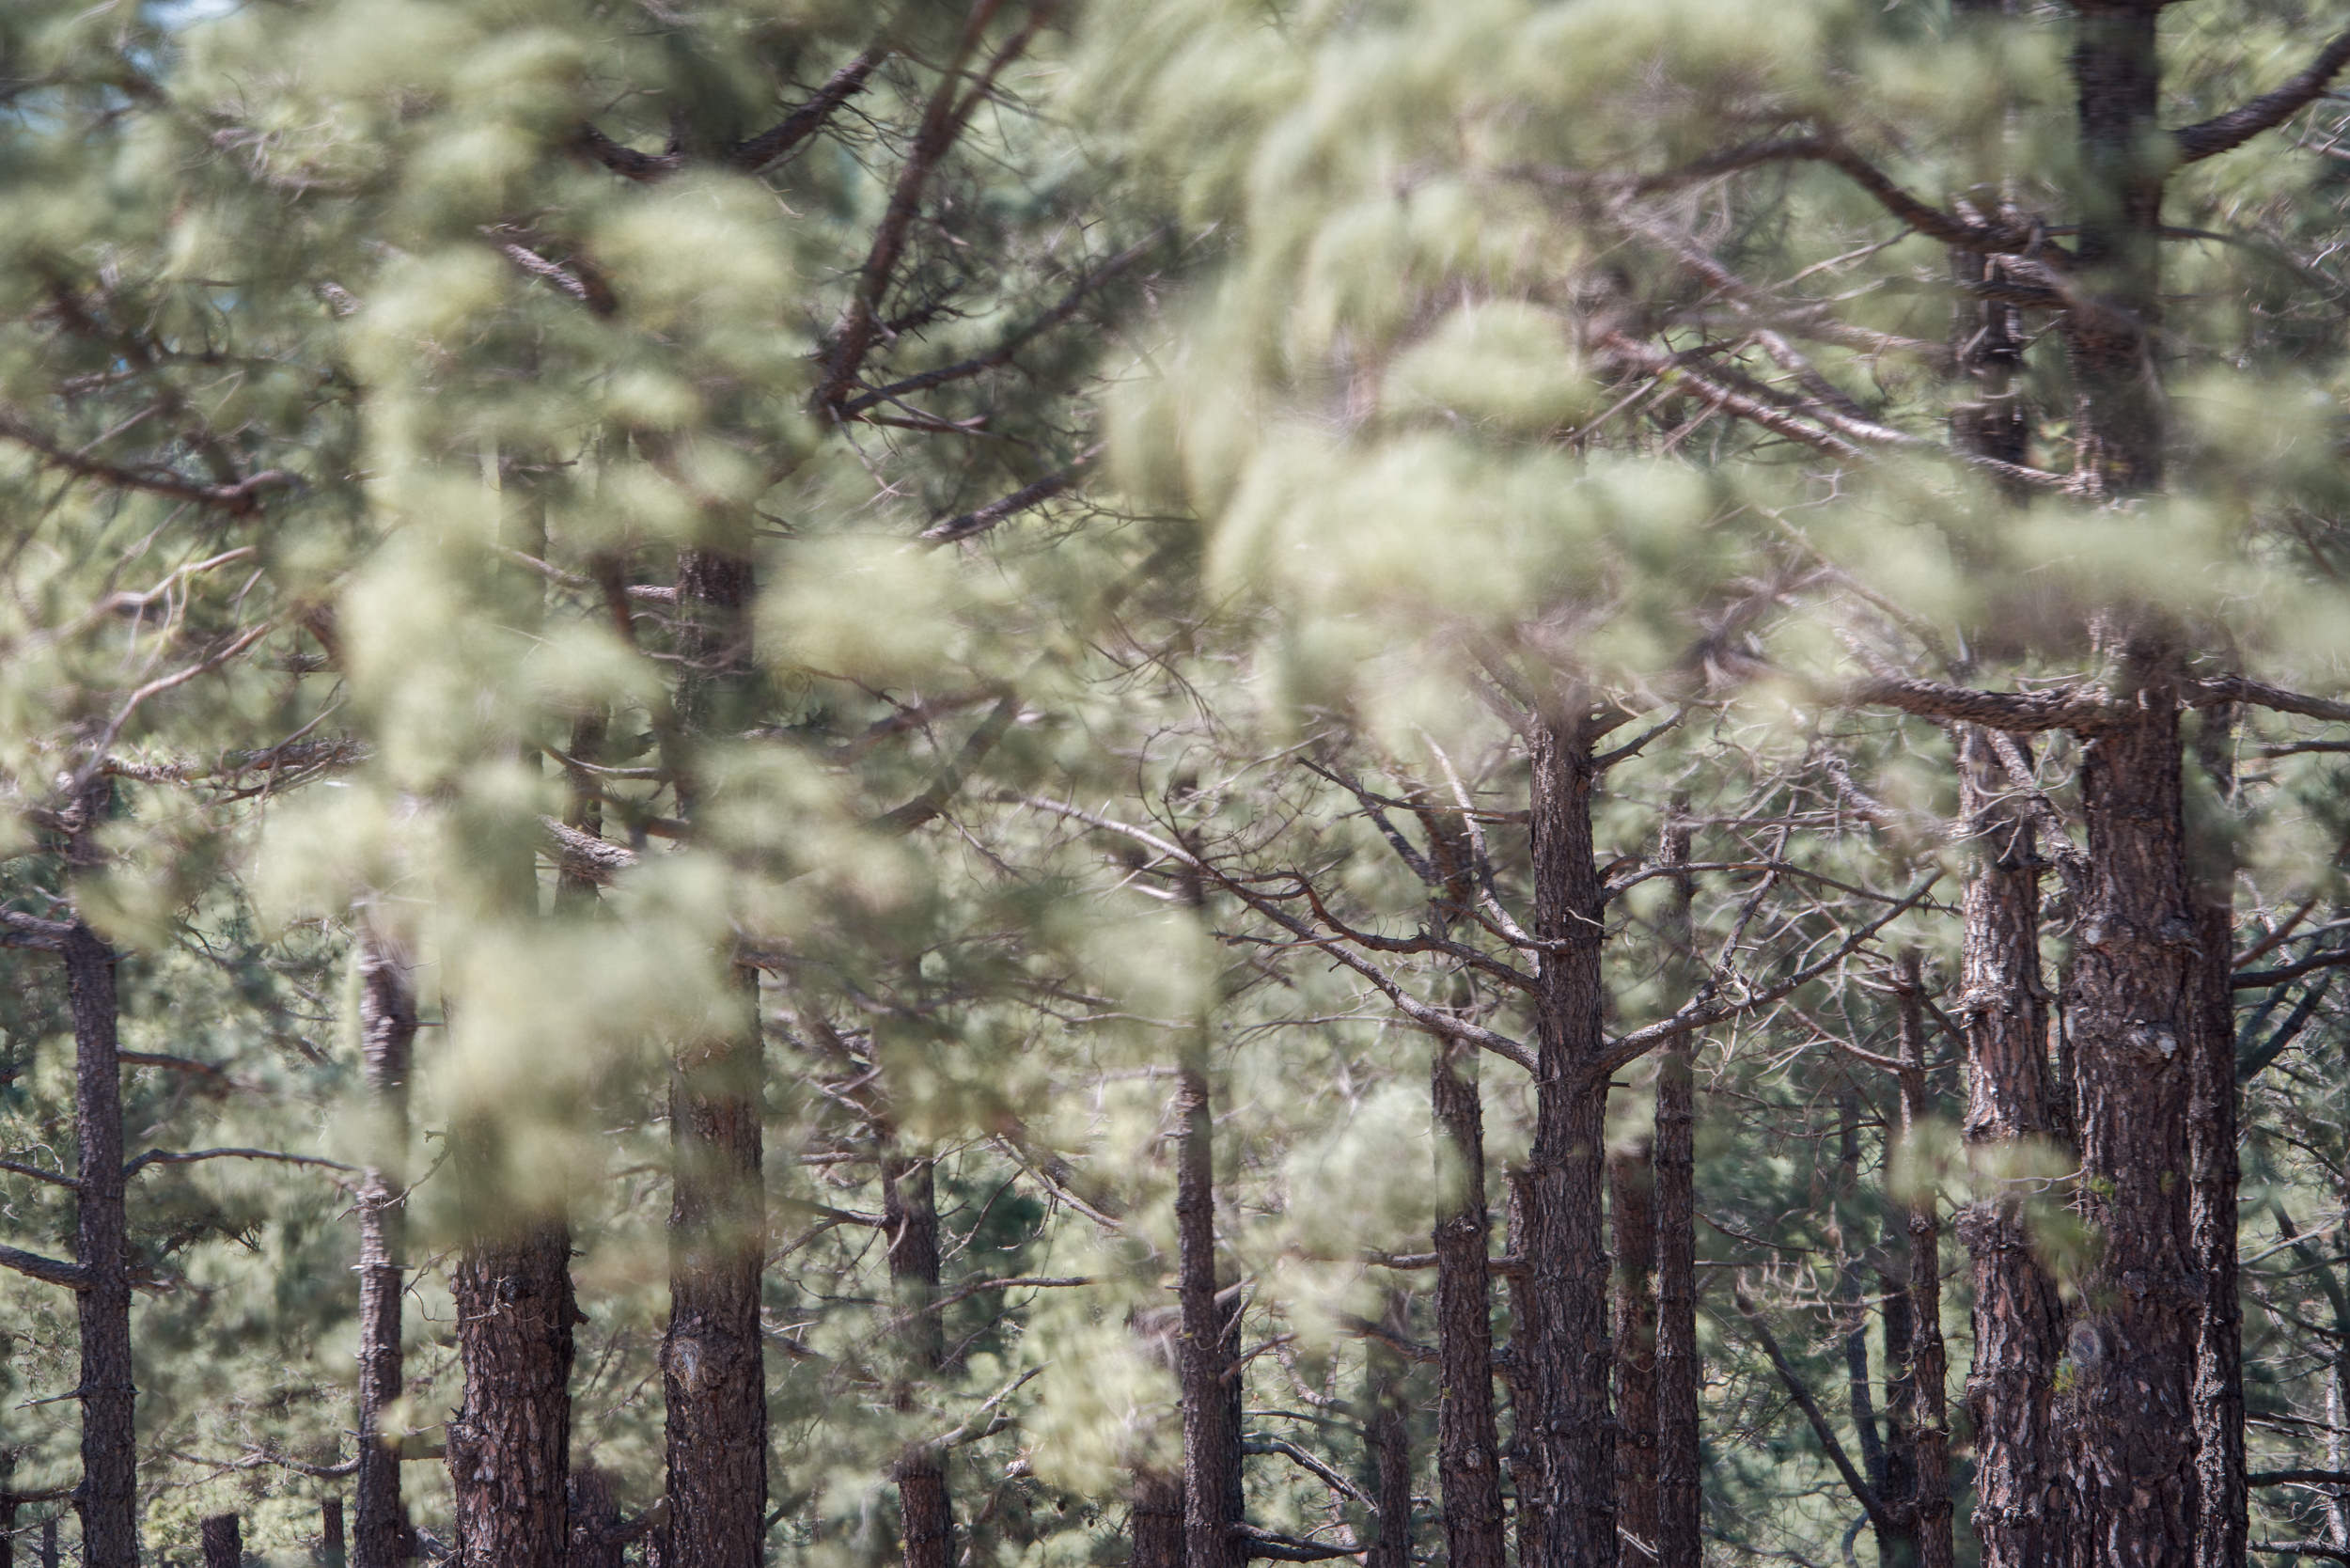 Playing with movement, how to photograph the breeze in the forest - La Palma island, Rafael Rojas.jpg